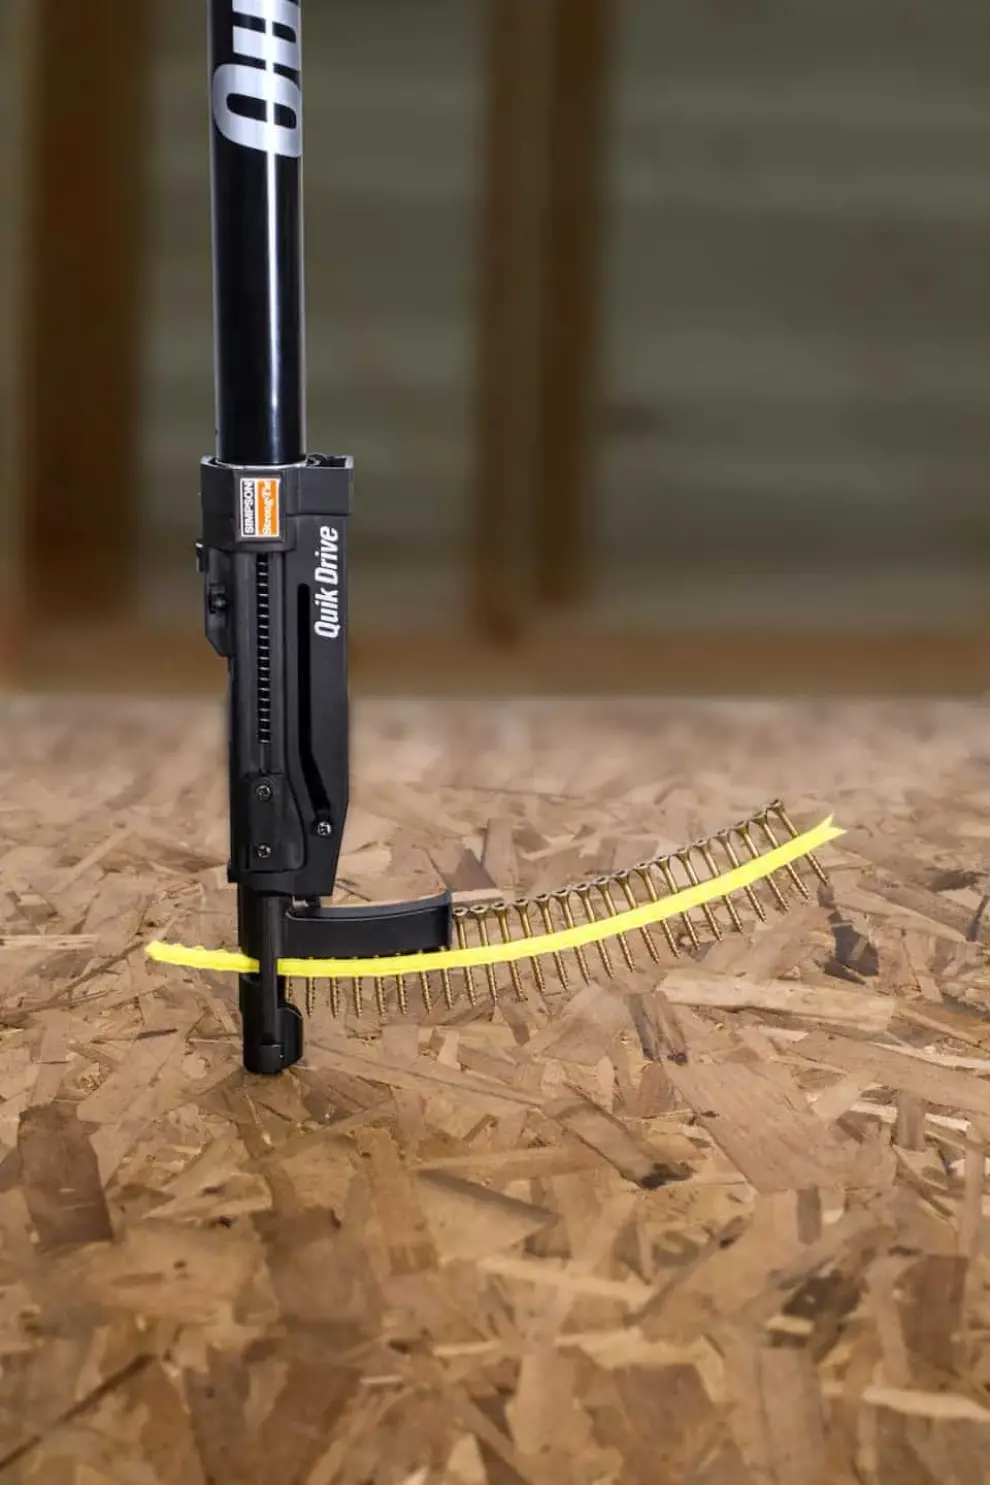 Simpson Strong-Tie Introduces WSVF Subfloor Screw with Coating Approved for Use with Fire-Retardant-Treated Lumber